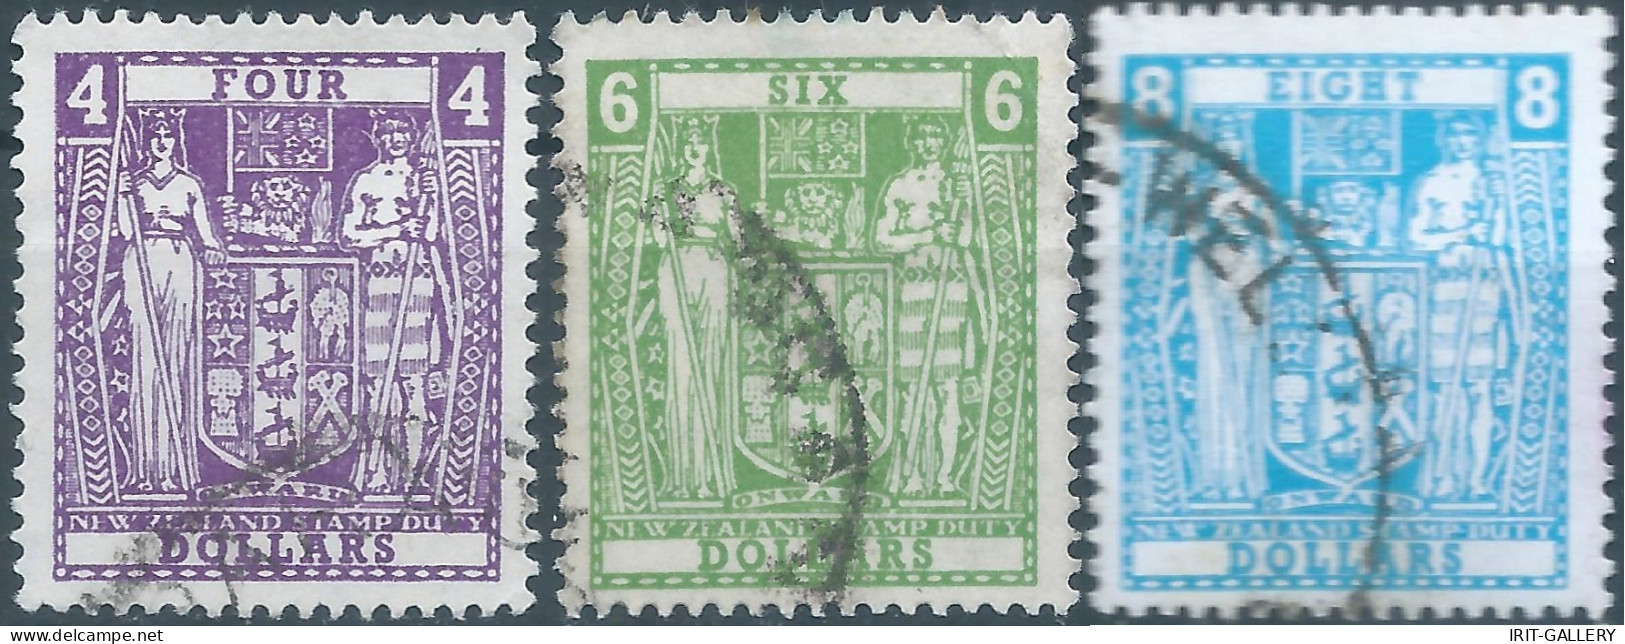 Nuova Zelanda,Nouvelle-Zélande- NEW ZELAND 1967 REVENUE STAMP DUTY-Tax Fiscal,4 - 6 - 8 Dollars,Obliterated - Post-fiscaal